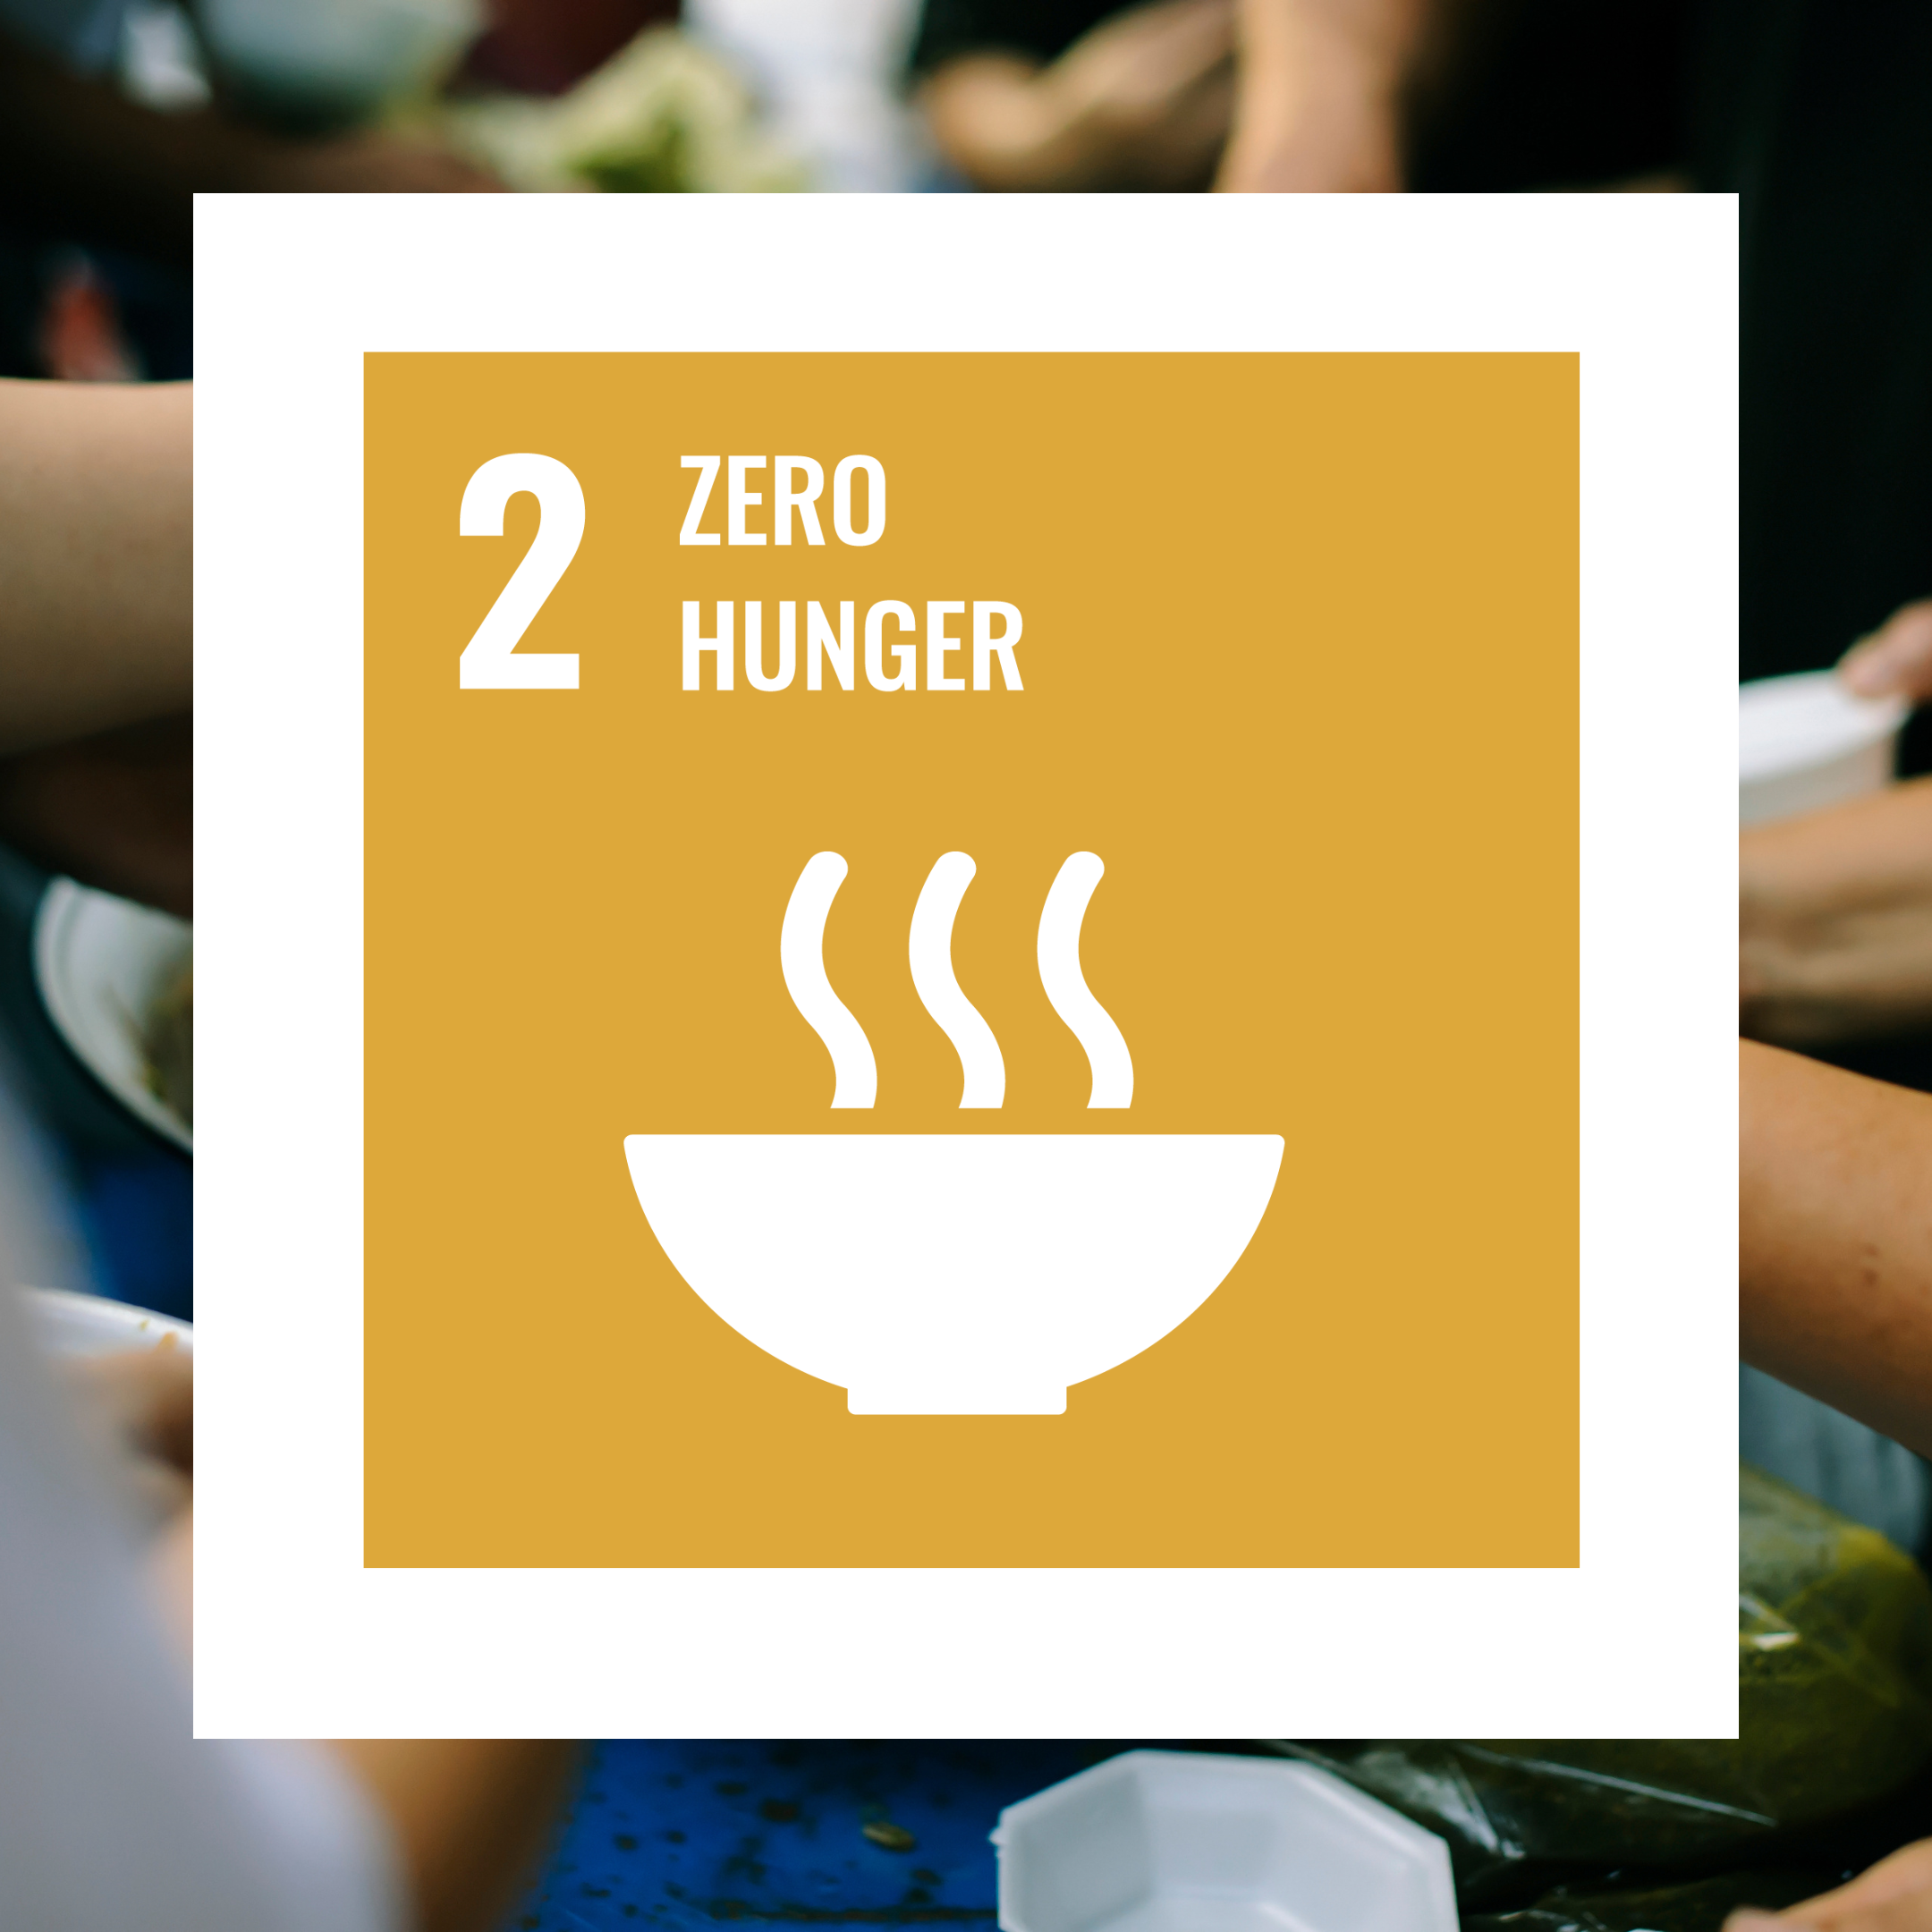 The image depicts the logo for SDG2, Zero Hunger. In the background are hands reaching for food.